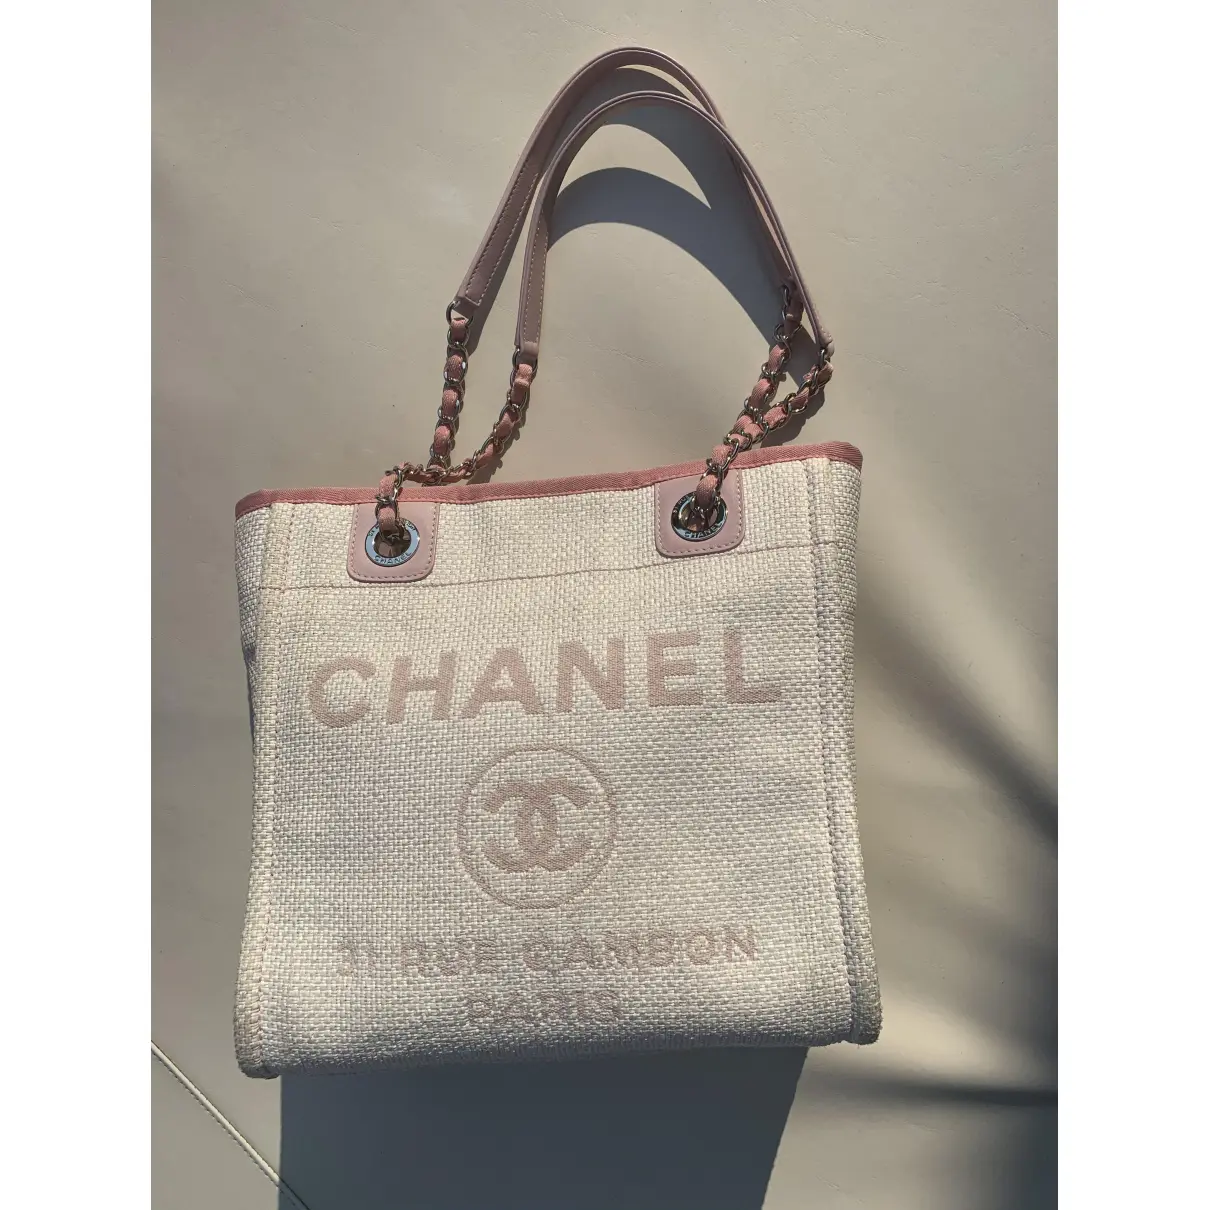 Buy Chanel North South Deauville tote online